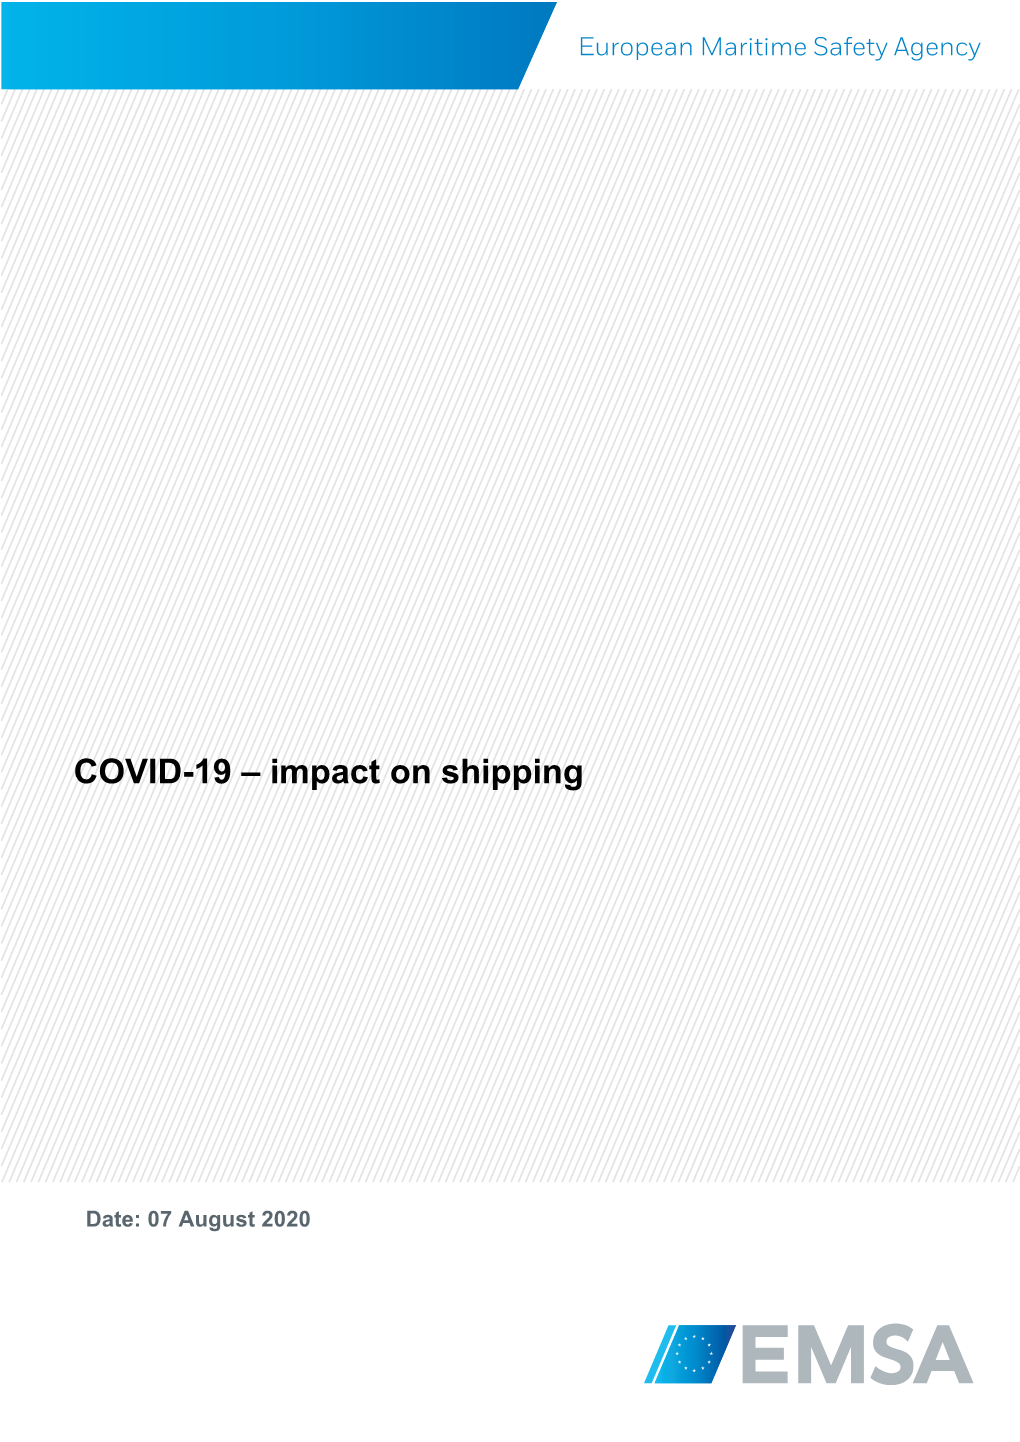 COVID-19 – Impact on Shipping